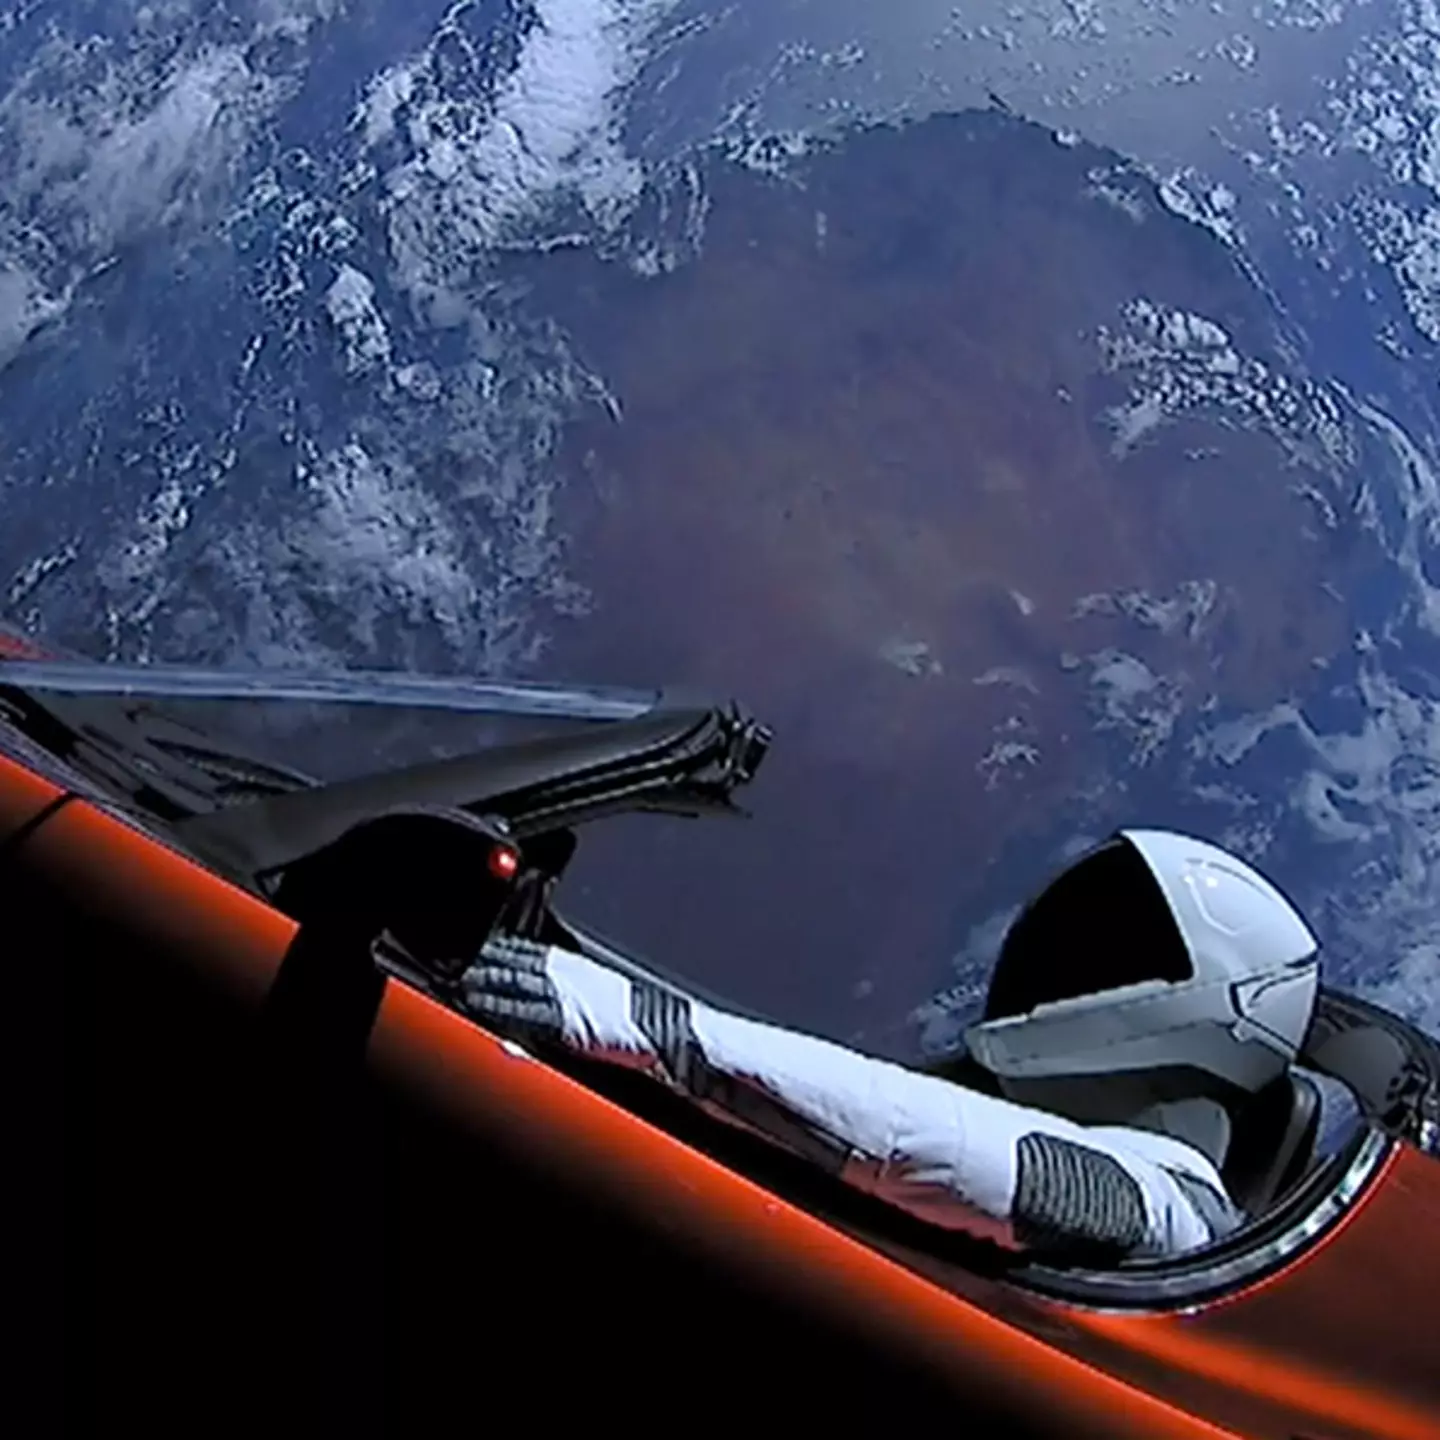 Here's where Elon Musk's Tesla is now after shooting it into space 6 years ago